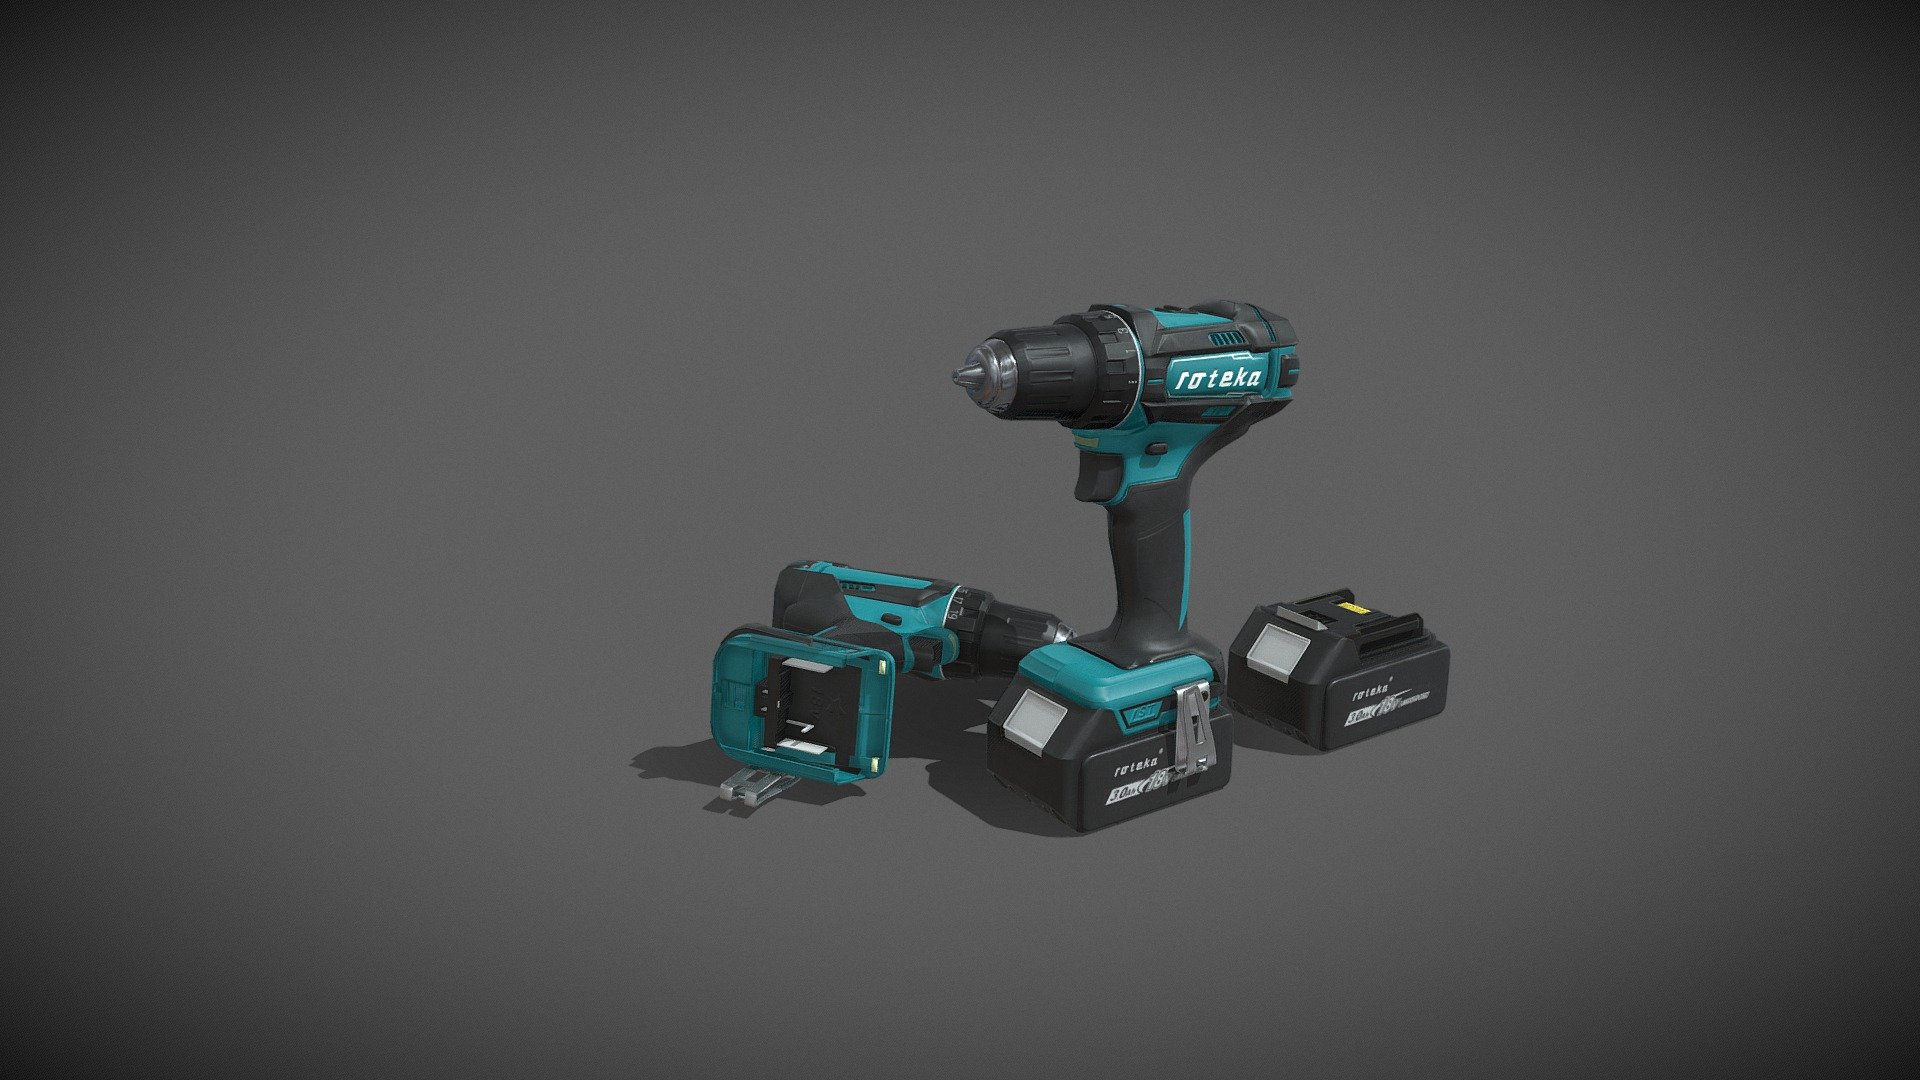 Representing a high-fidelity military class 3D model of a drill. Realistic piece of working equipment with detachable parts like a battery - movable chuck, reverse switch, and torque adjuster.

Included are .fbx and .obj files with corresponding texture maps. Also, you'll find a .blend file with a basic lighting setup.

Great for visualizations, VR-AR simulations, and games 3d model